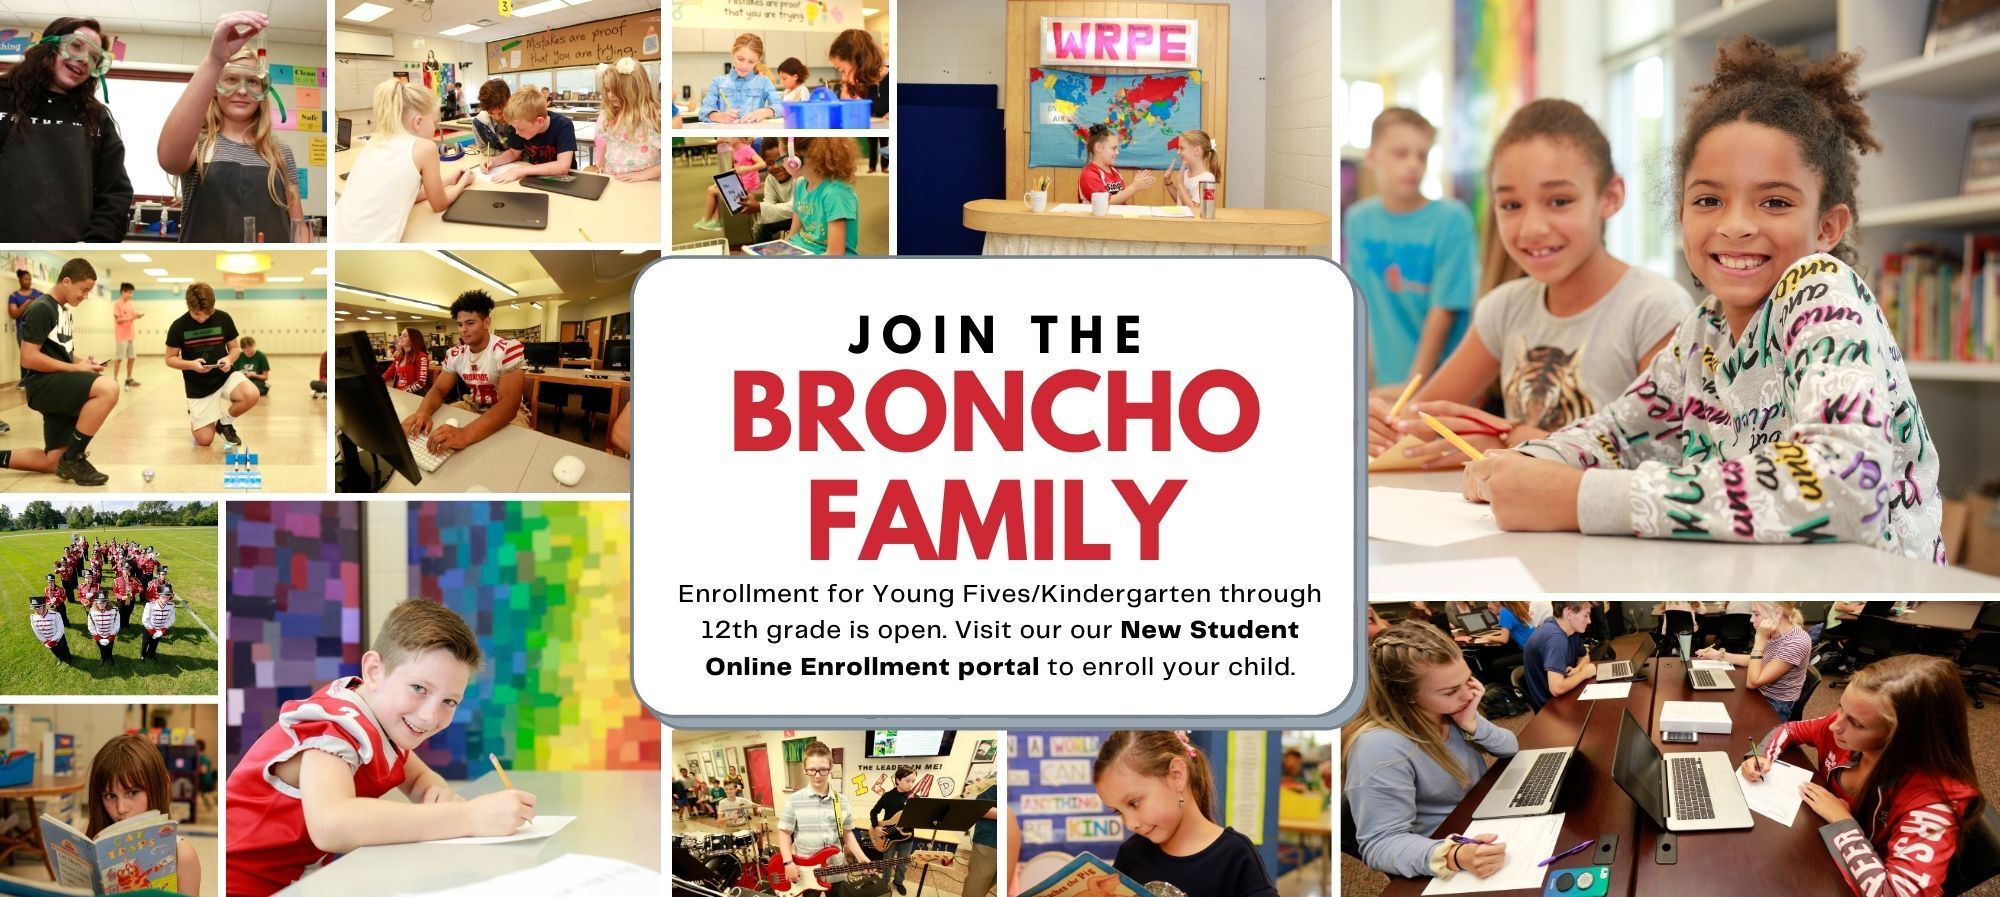 Join the Broncho Family!